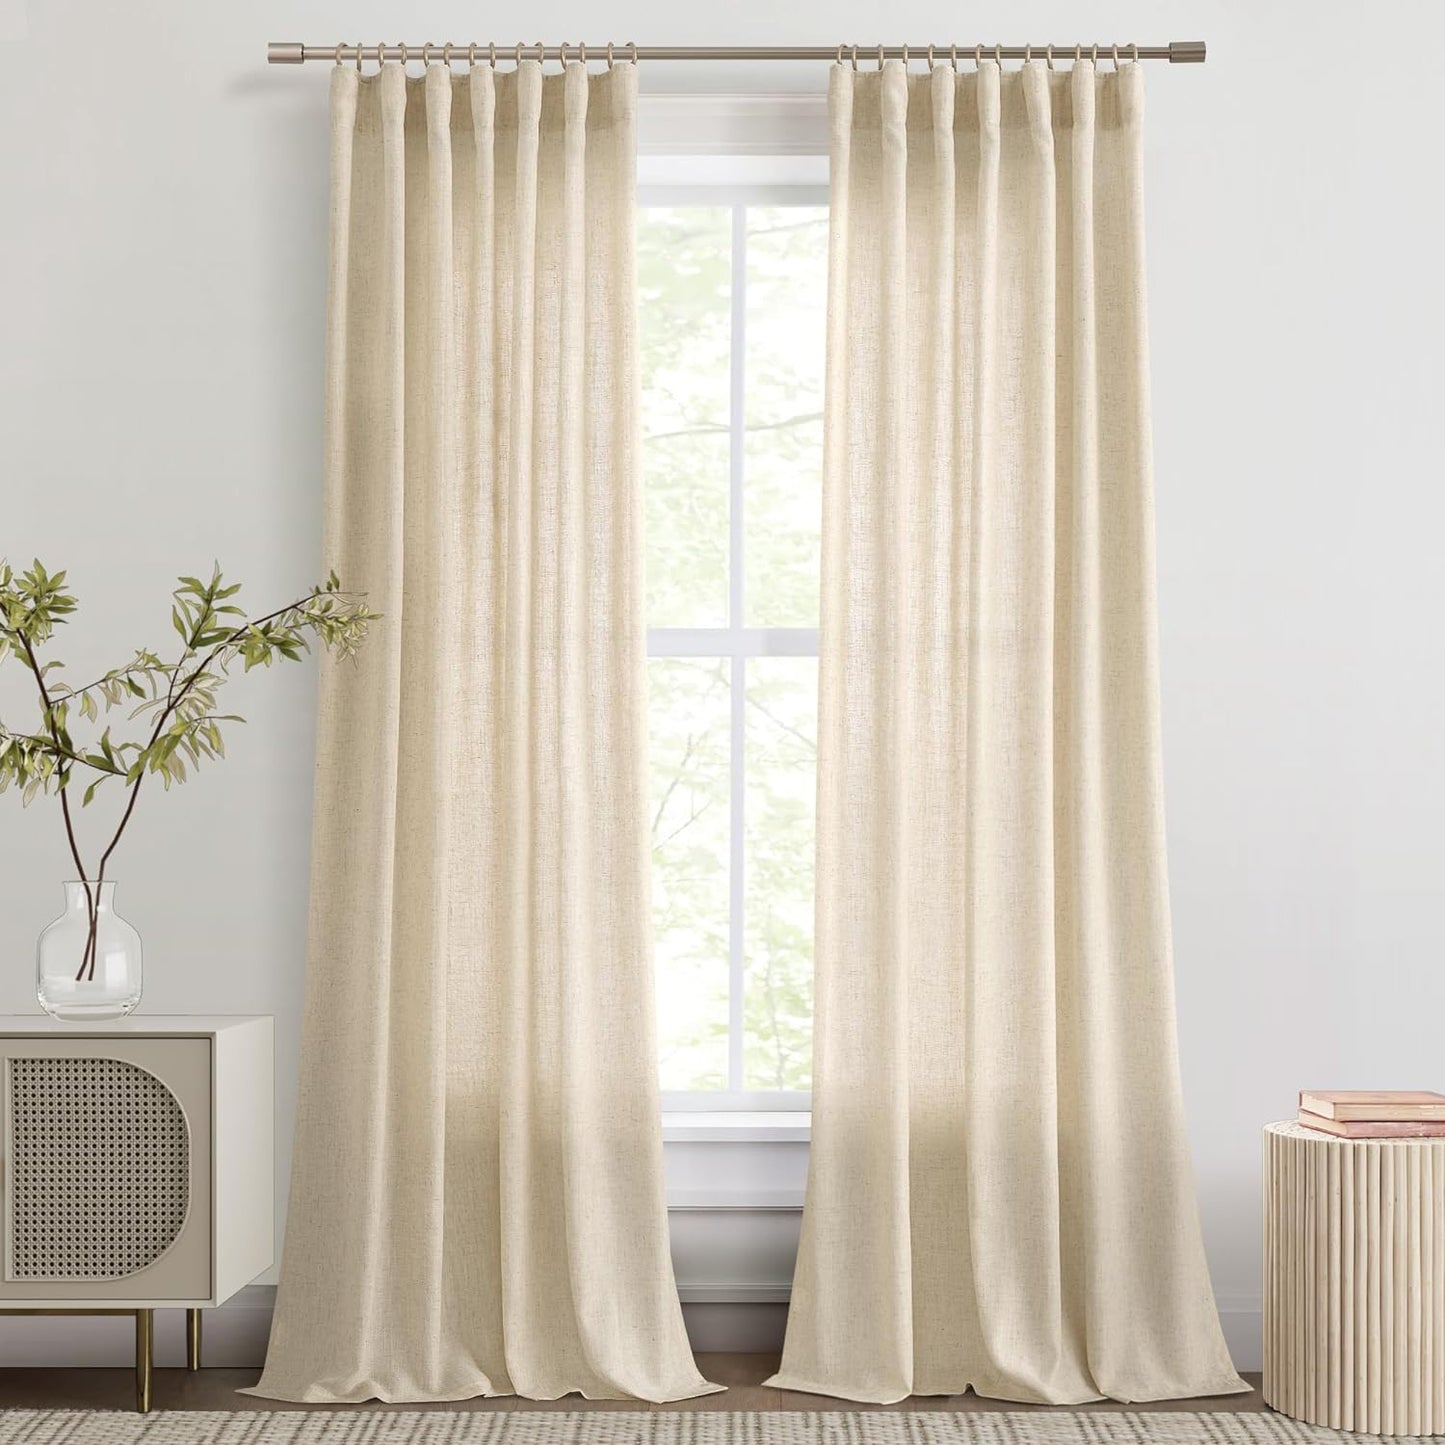 Joywell Natural Linen Cream Curtains 84 Inches Long for Living Room Bedroom Hook Belt Back Tab Pinch Pleated Light Filtering Ivory White Neutral Boho Modern Farmhouse Linen Drapes 84 Length 2 Panels  Joywell Sand Beige 52W X 95L Inch X 2 Panels 